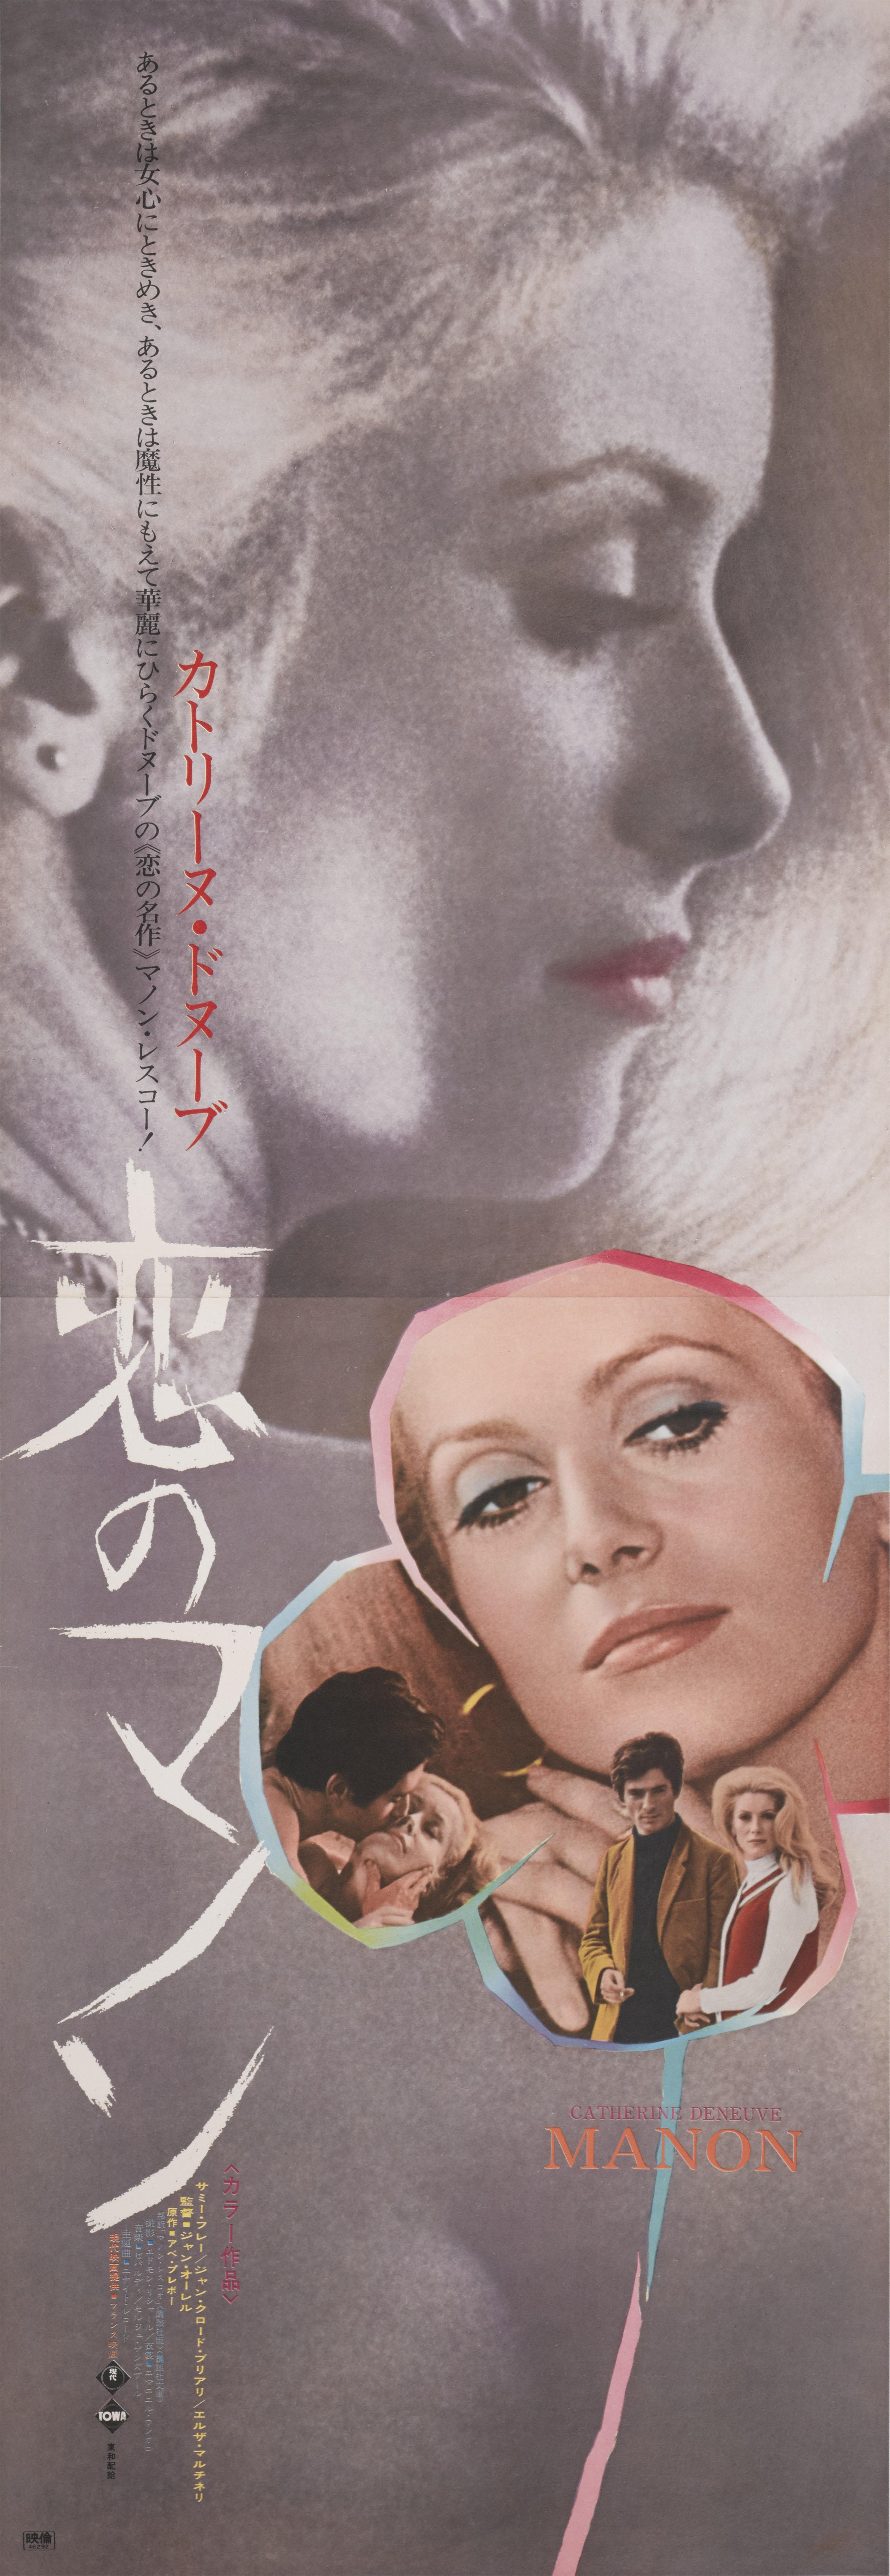 Original Japanese film poster for Jane Aurel's 1968 drama starring Catherine Deneuve, Jean Claude Brialy.
The poster is unfolded it was printed in two sheets and is now conservation Linen backed.
The poster would be shipped rolled in a strong tube